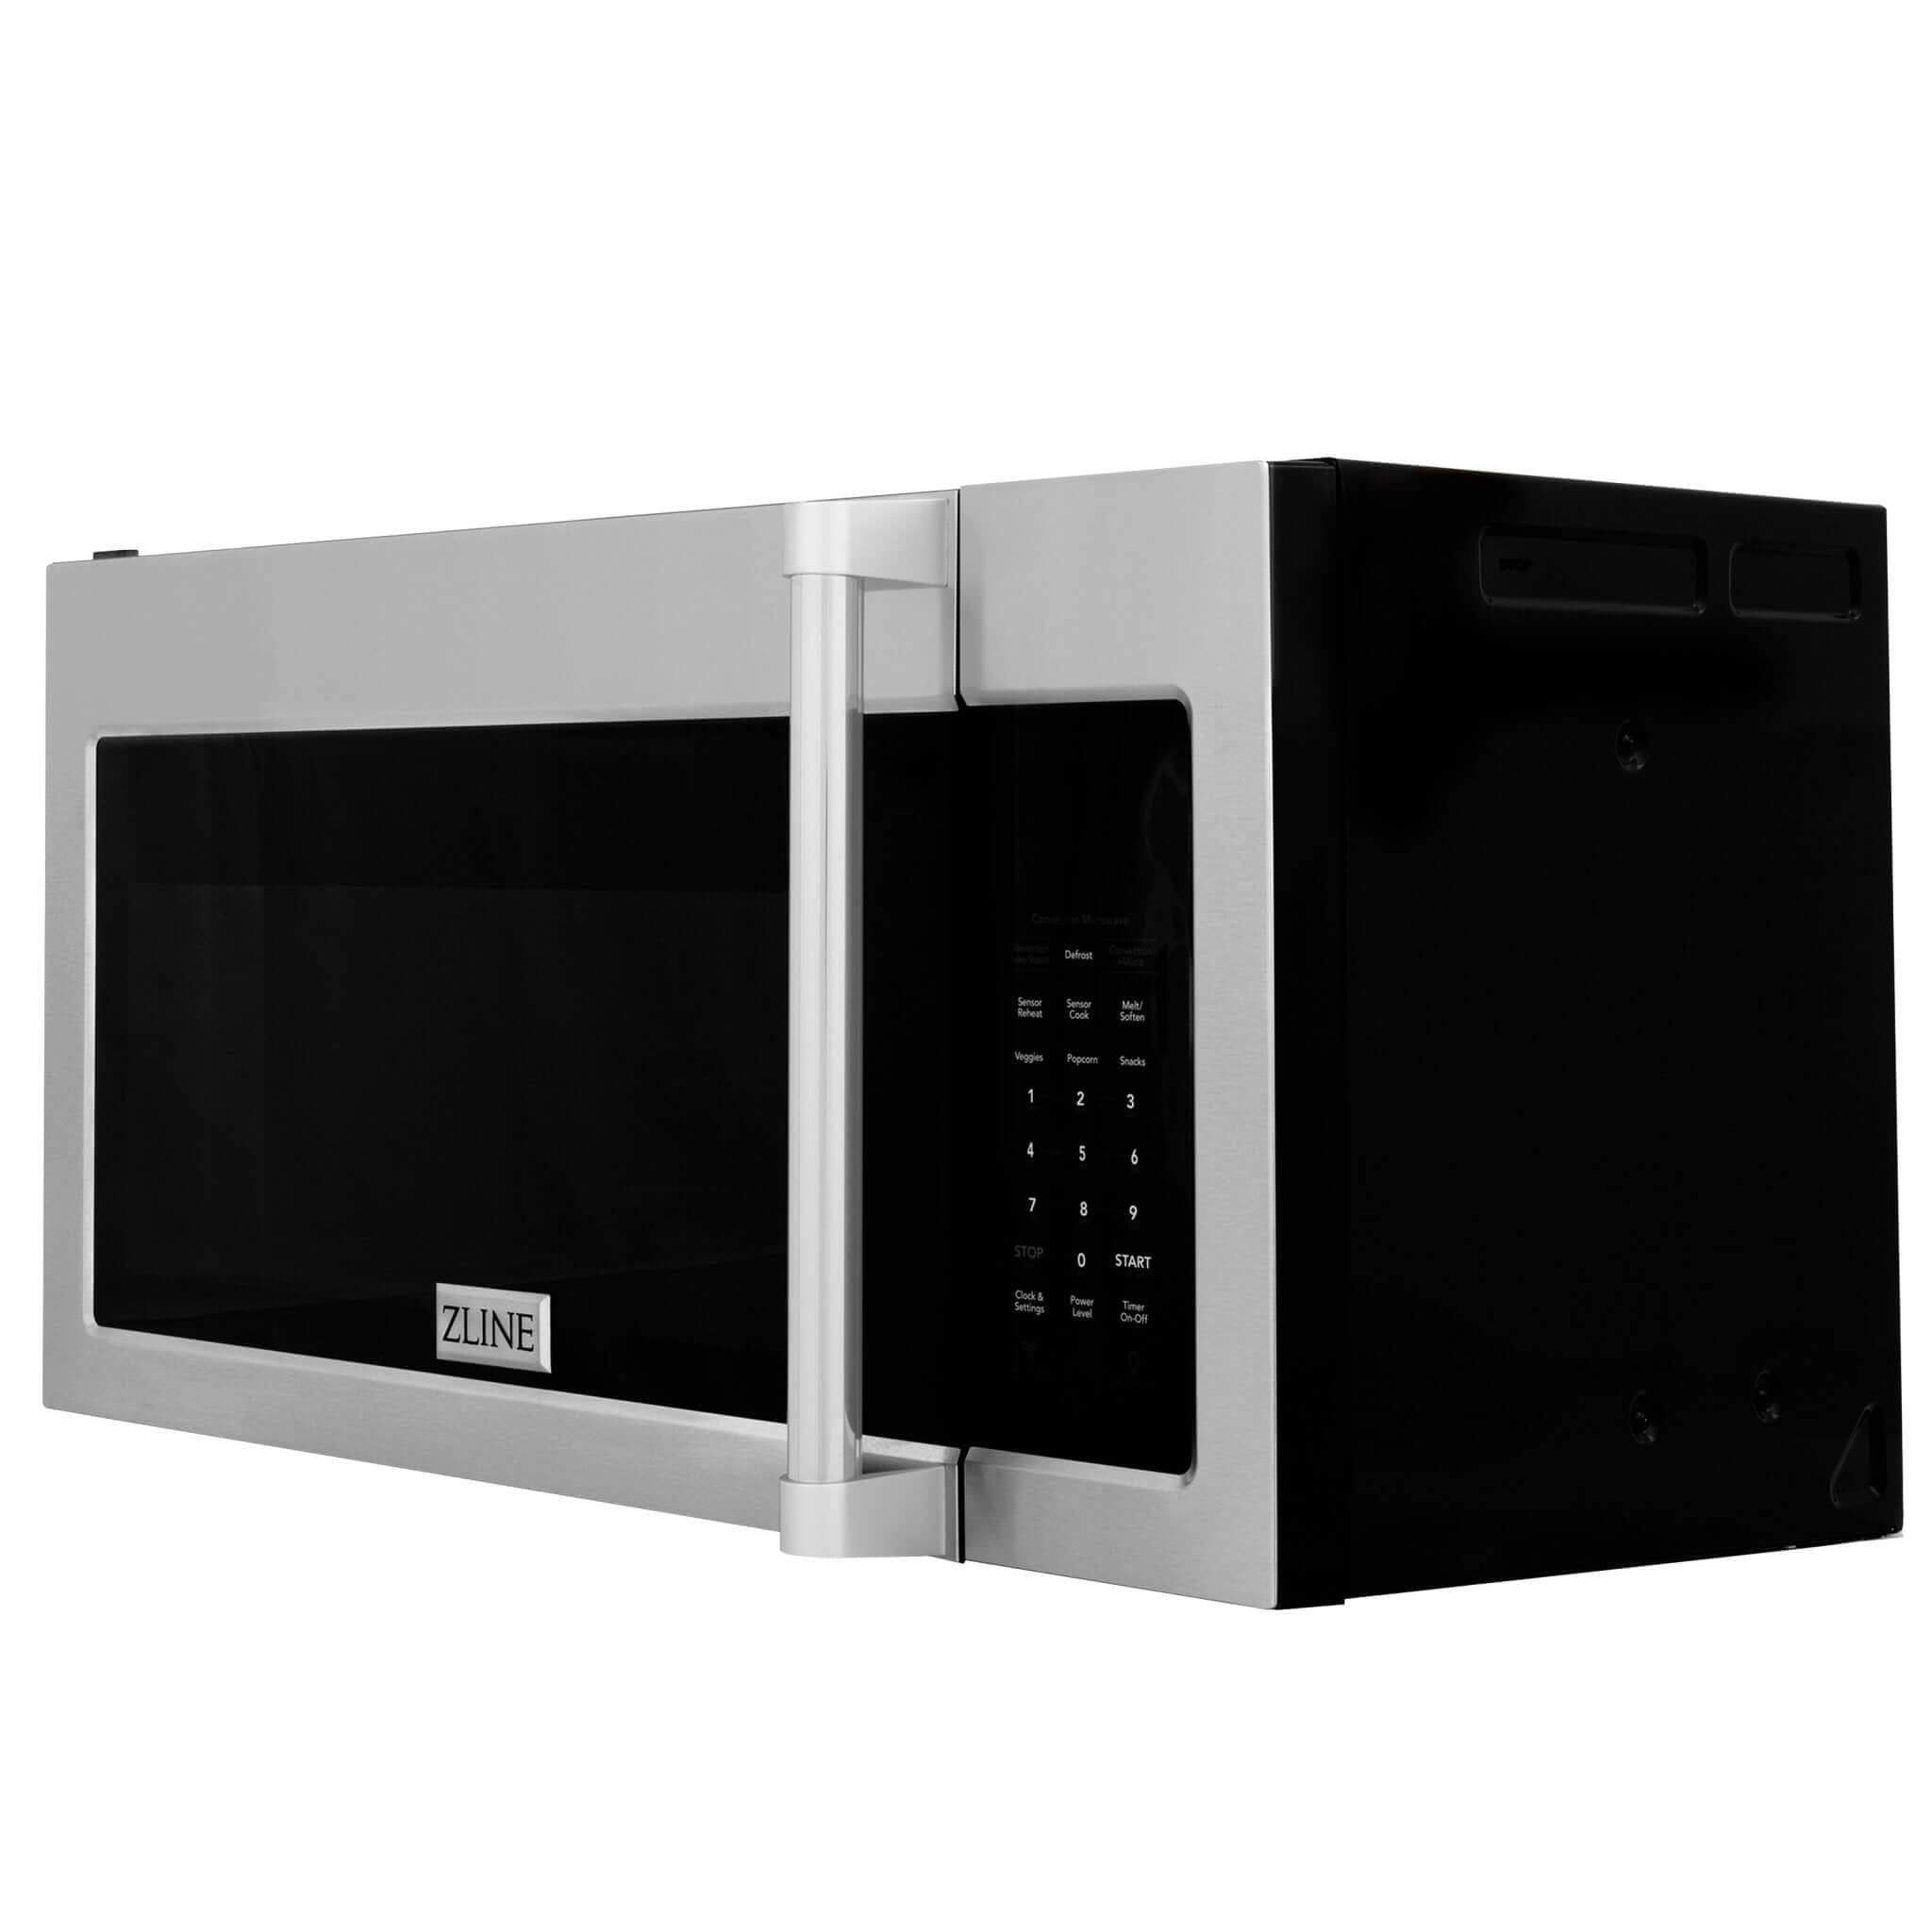 ZLINE Over the Range Microwave Oven in Stainless Steel & Black Stainless Steel with Modern Handle (MWO-OTR-H-30) - Microwave - ZLINE Kitchen and Bath